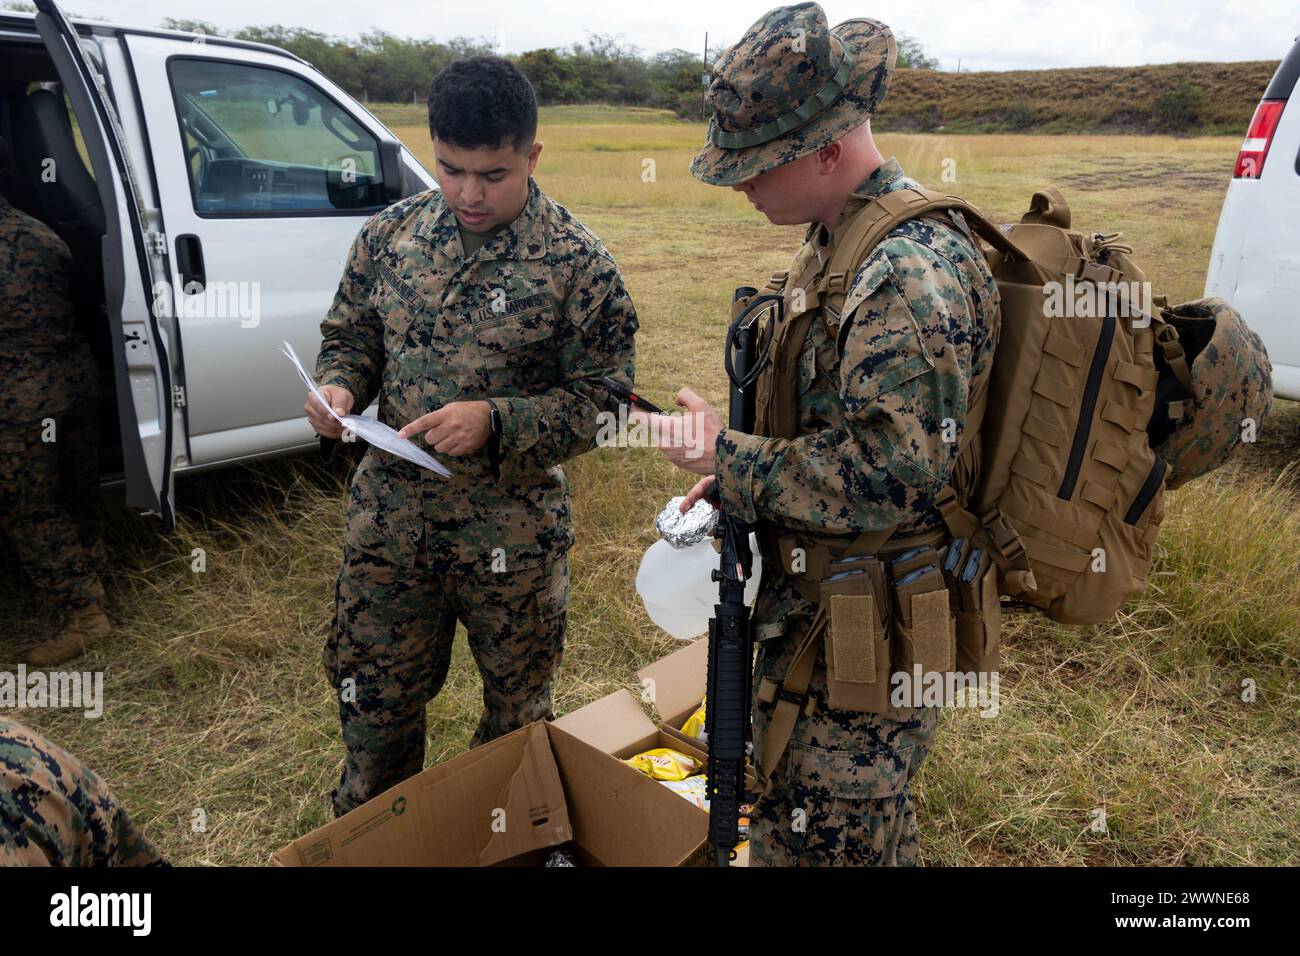 U.S. Marine Corps David Hernandez, a Network Administrator with Marine Aircraft Group (MAG) 24, 1st Marine Aircraft, shows a menu to a Marine on the rifle range during a volunteer event at Puuloa Range Training Facility, Ewa beach, Feb. 22, 2024. Marines with MAG-24 prepared and sold burgers, hotdogs, chips and drinks to Marines on the rifle range to raise funds for the 249th Marine Corps Ball.  Marine Corps Stock Photo